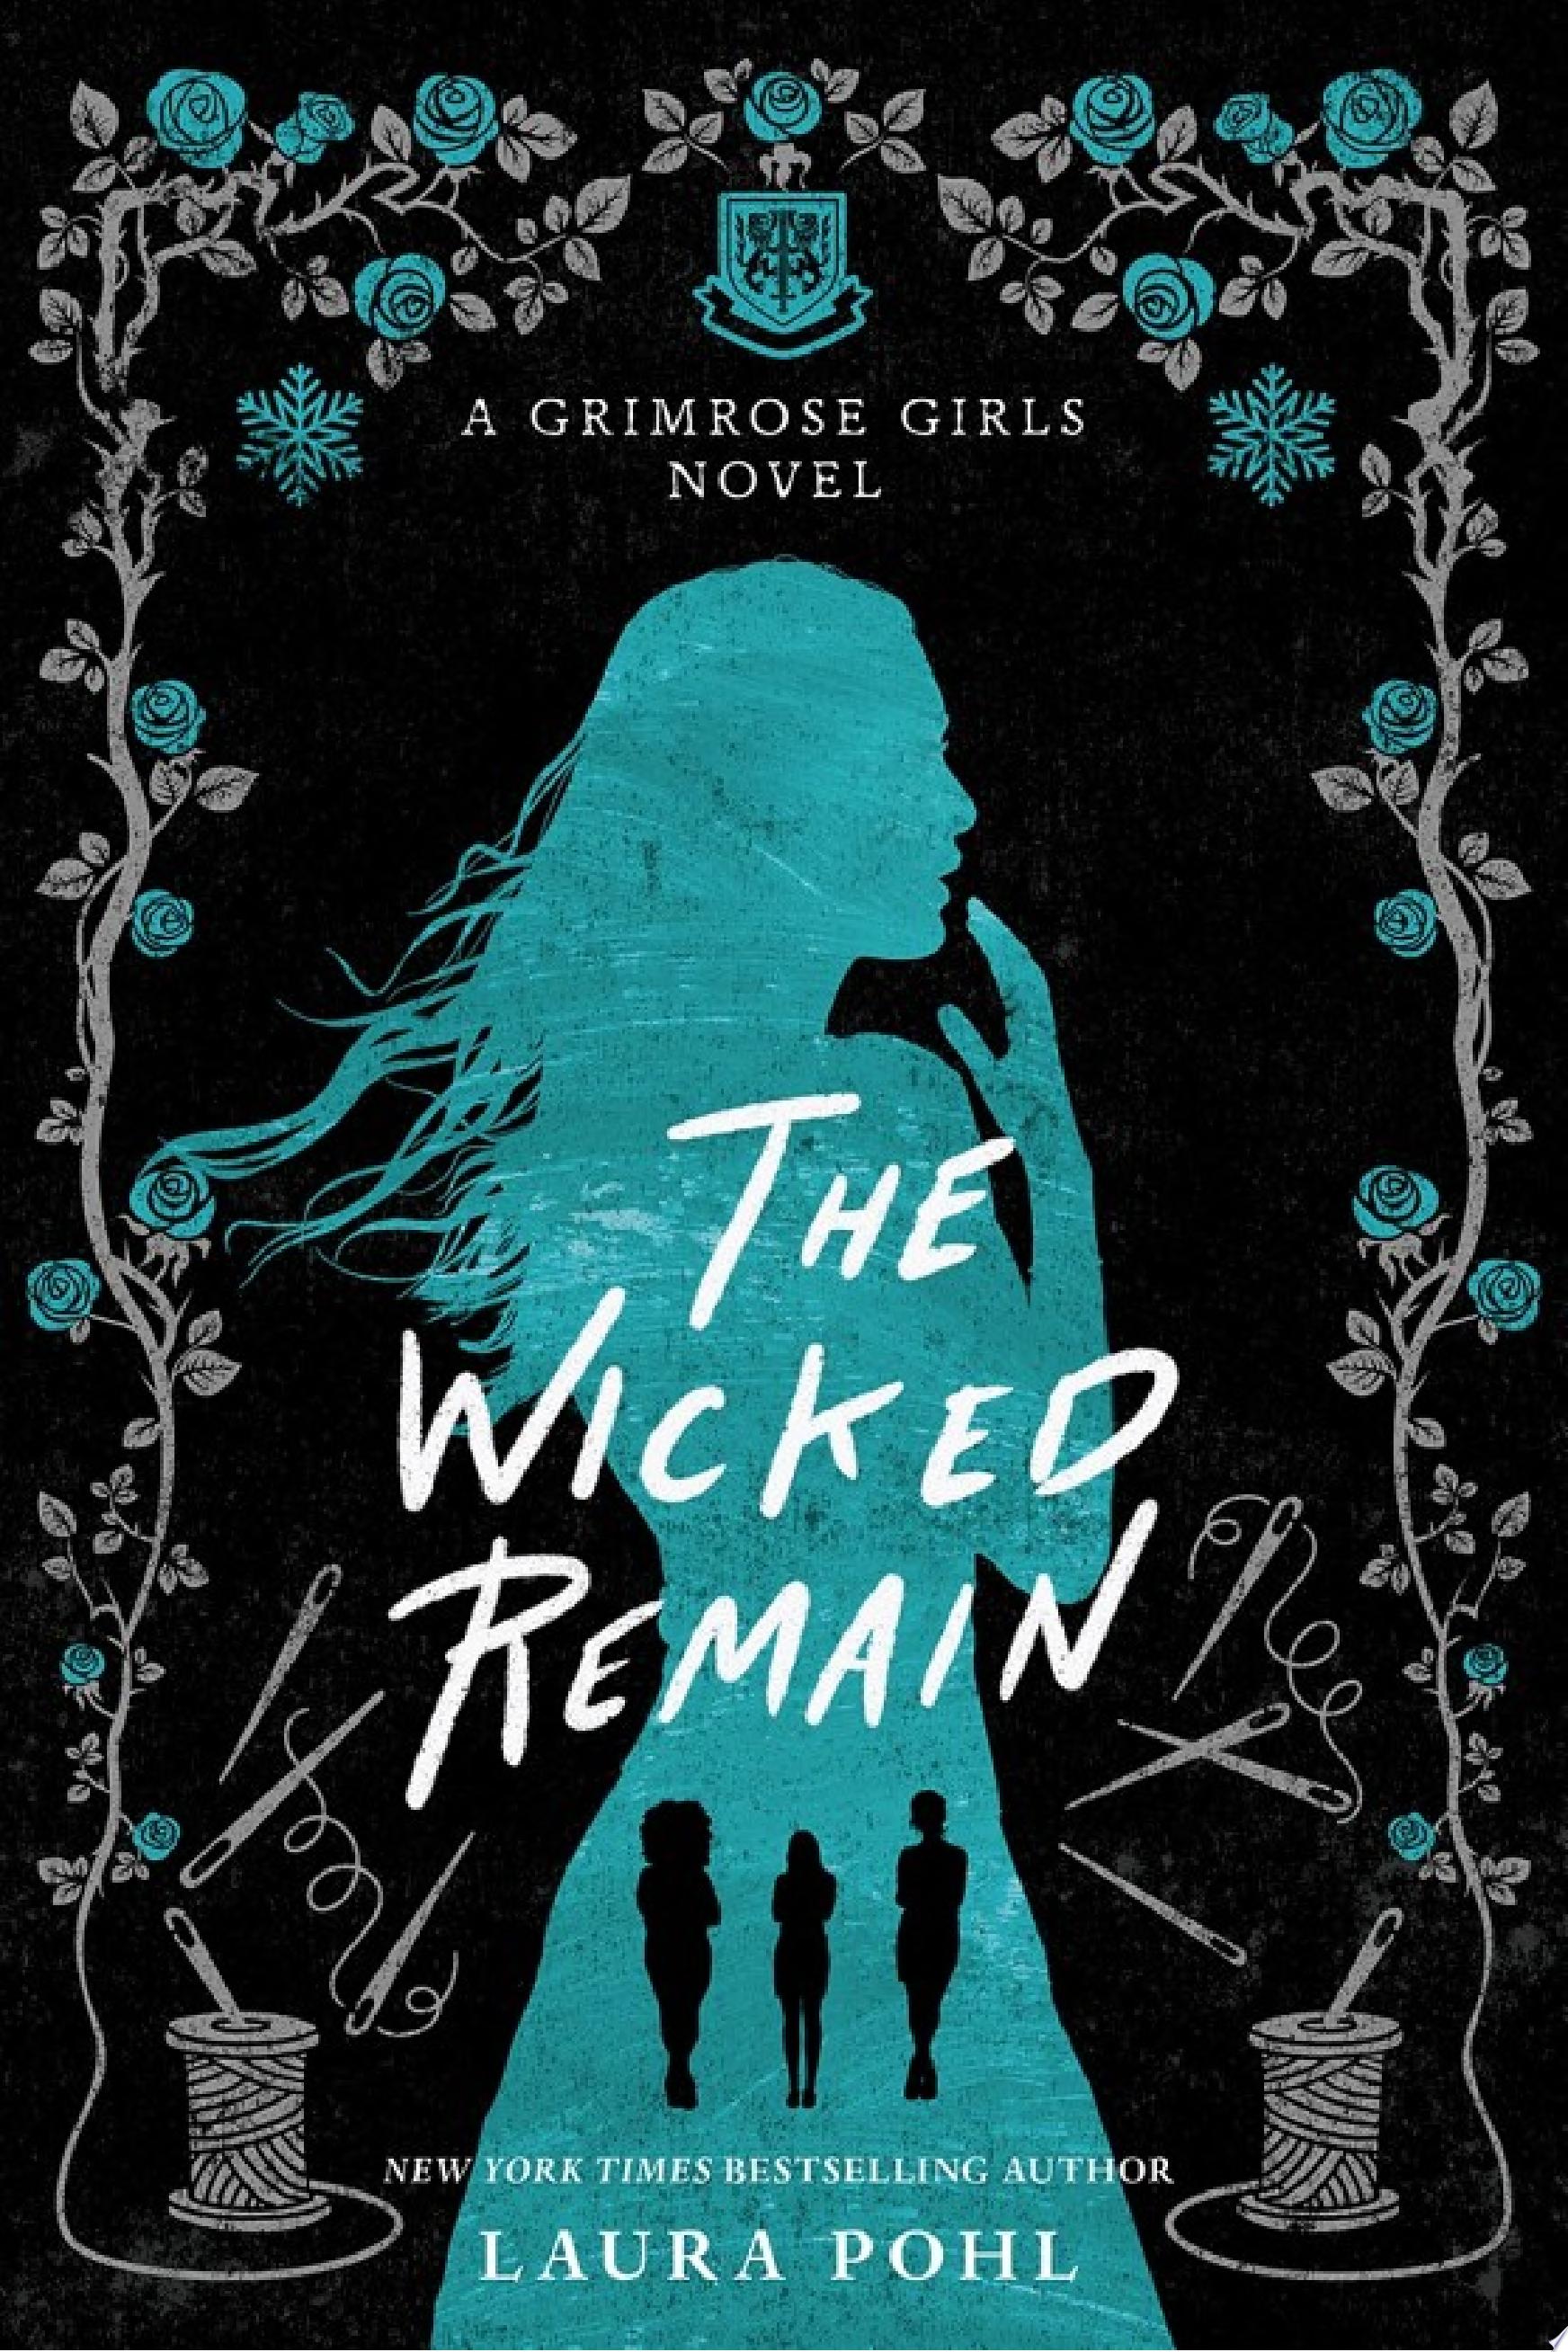 Image for "The Wicked Remain"